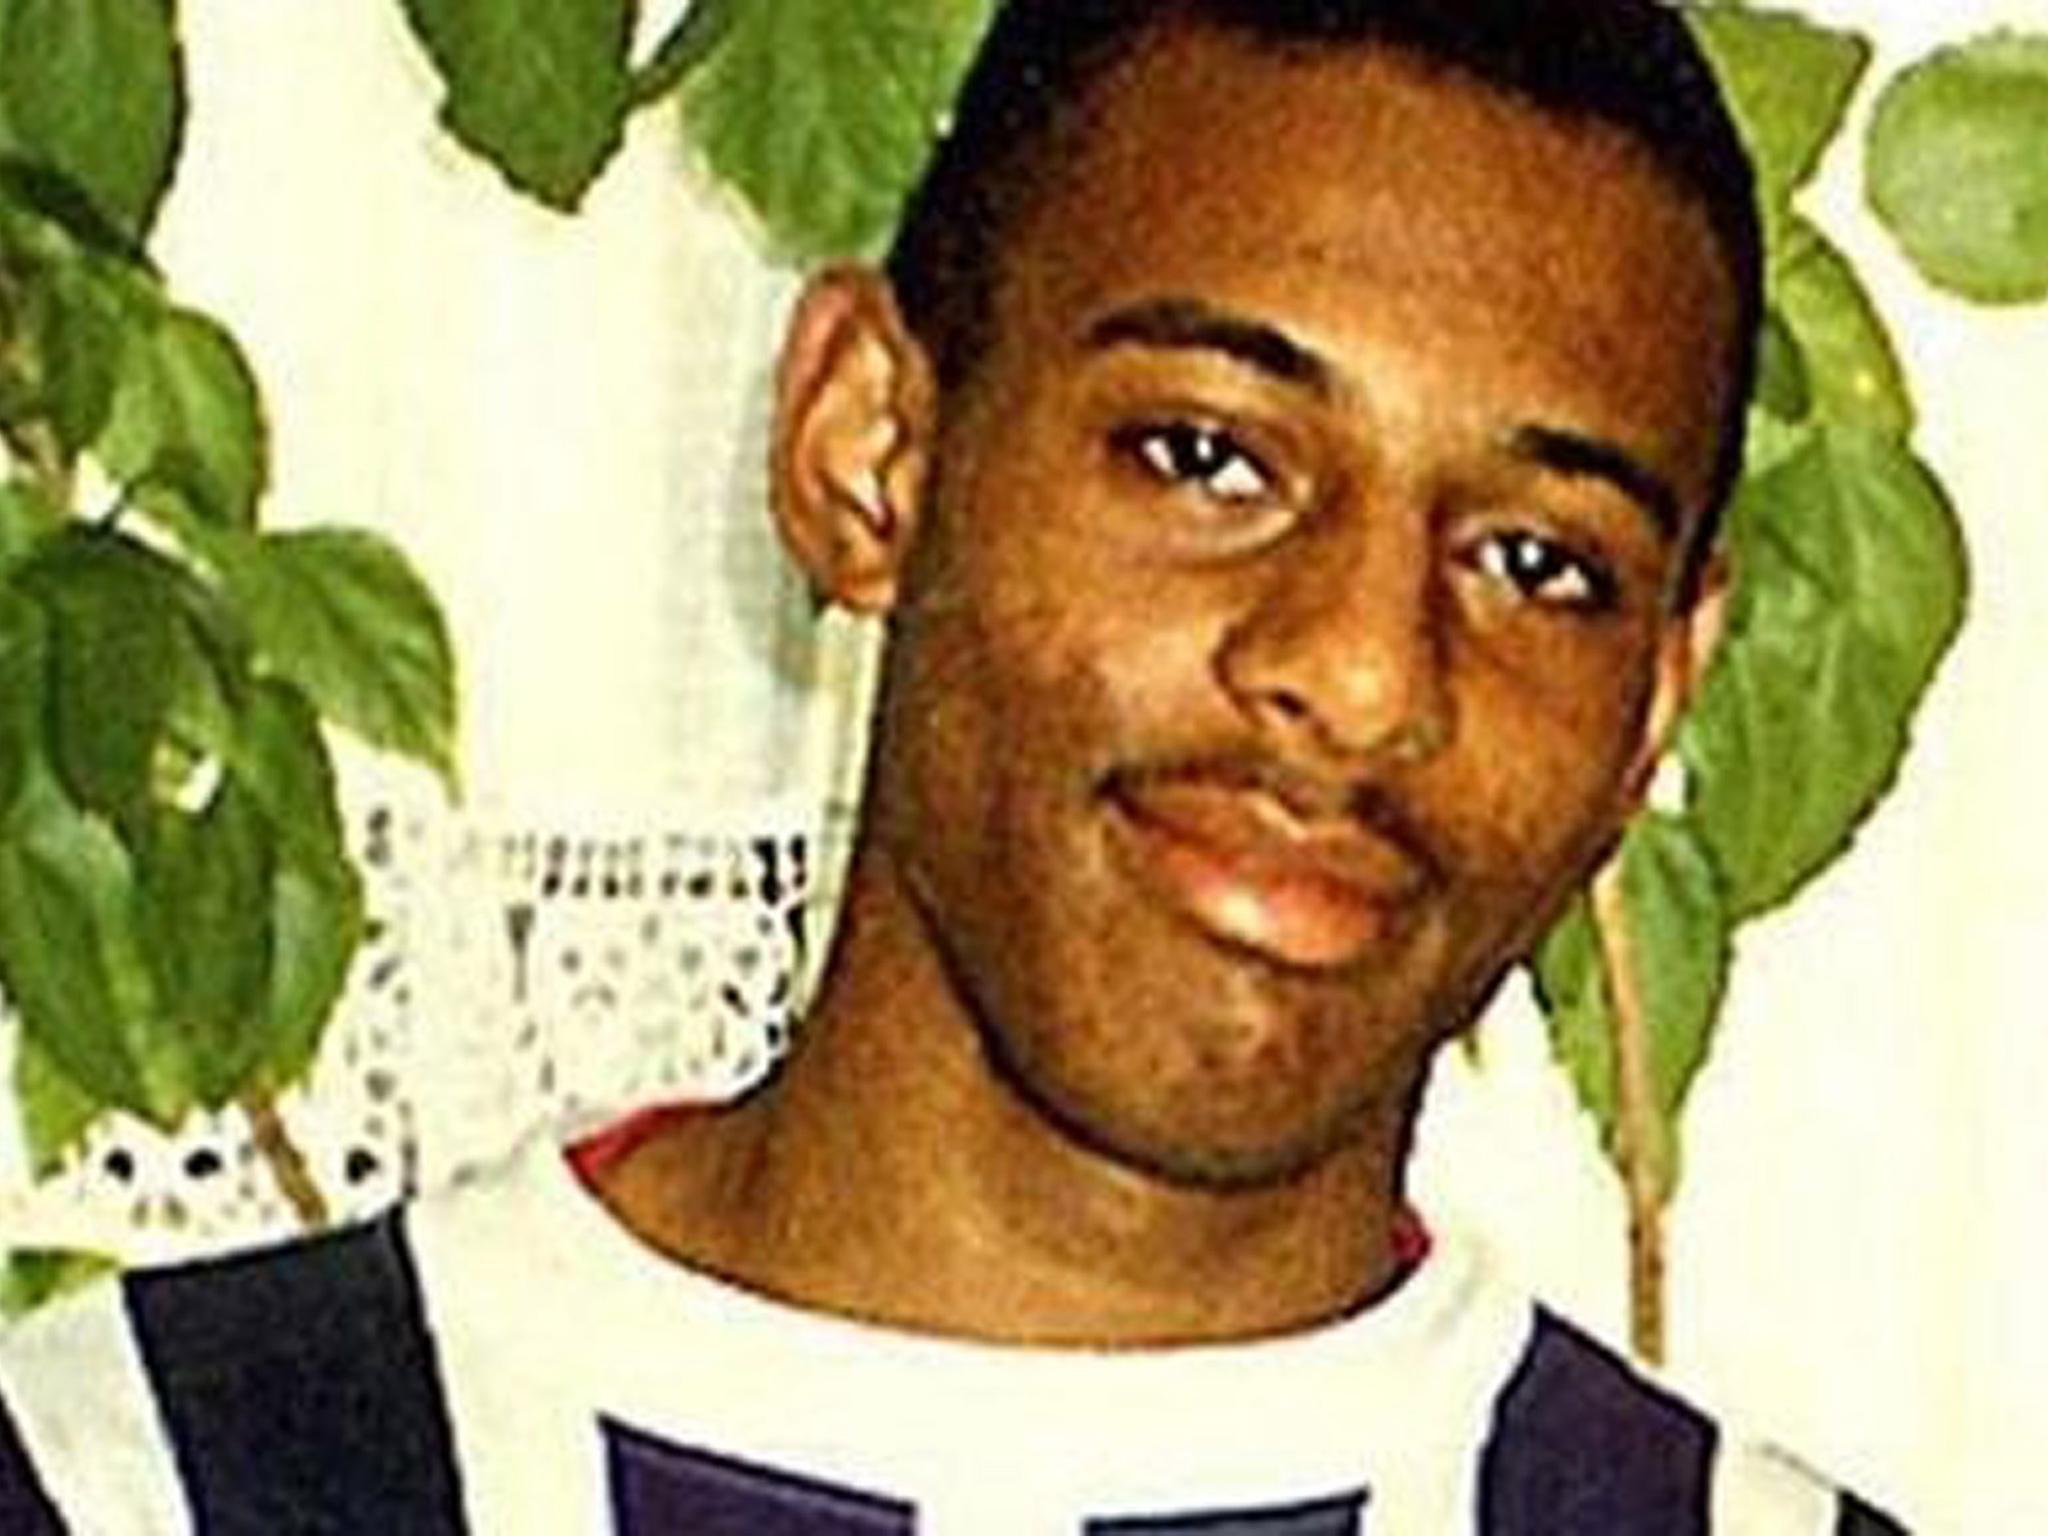 Stephen Lawrence was stabbed to death by a gang of white youths in an unprovoked racist attack in 1993